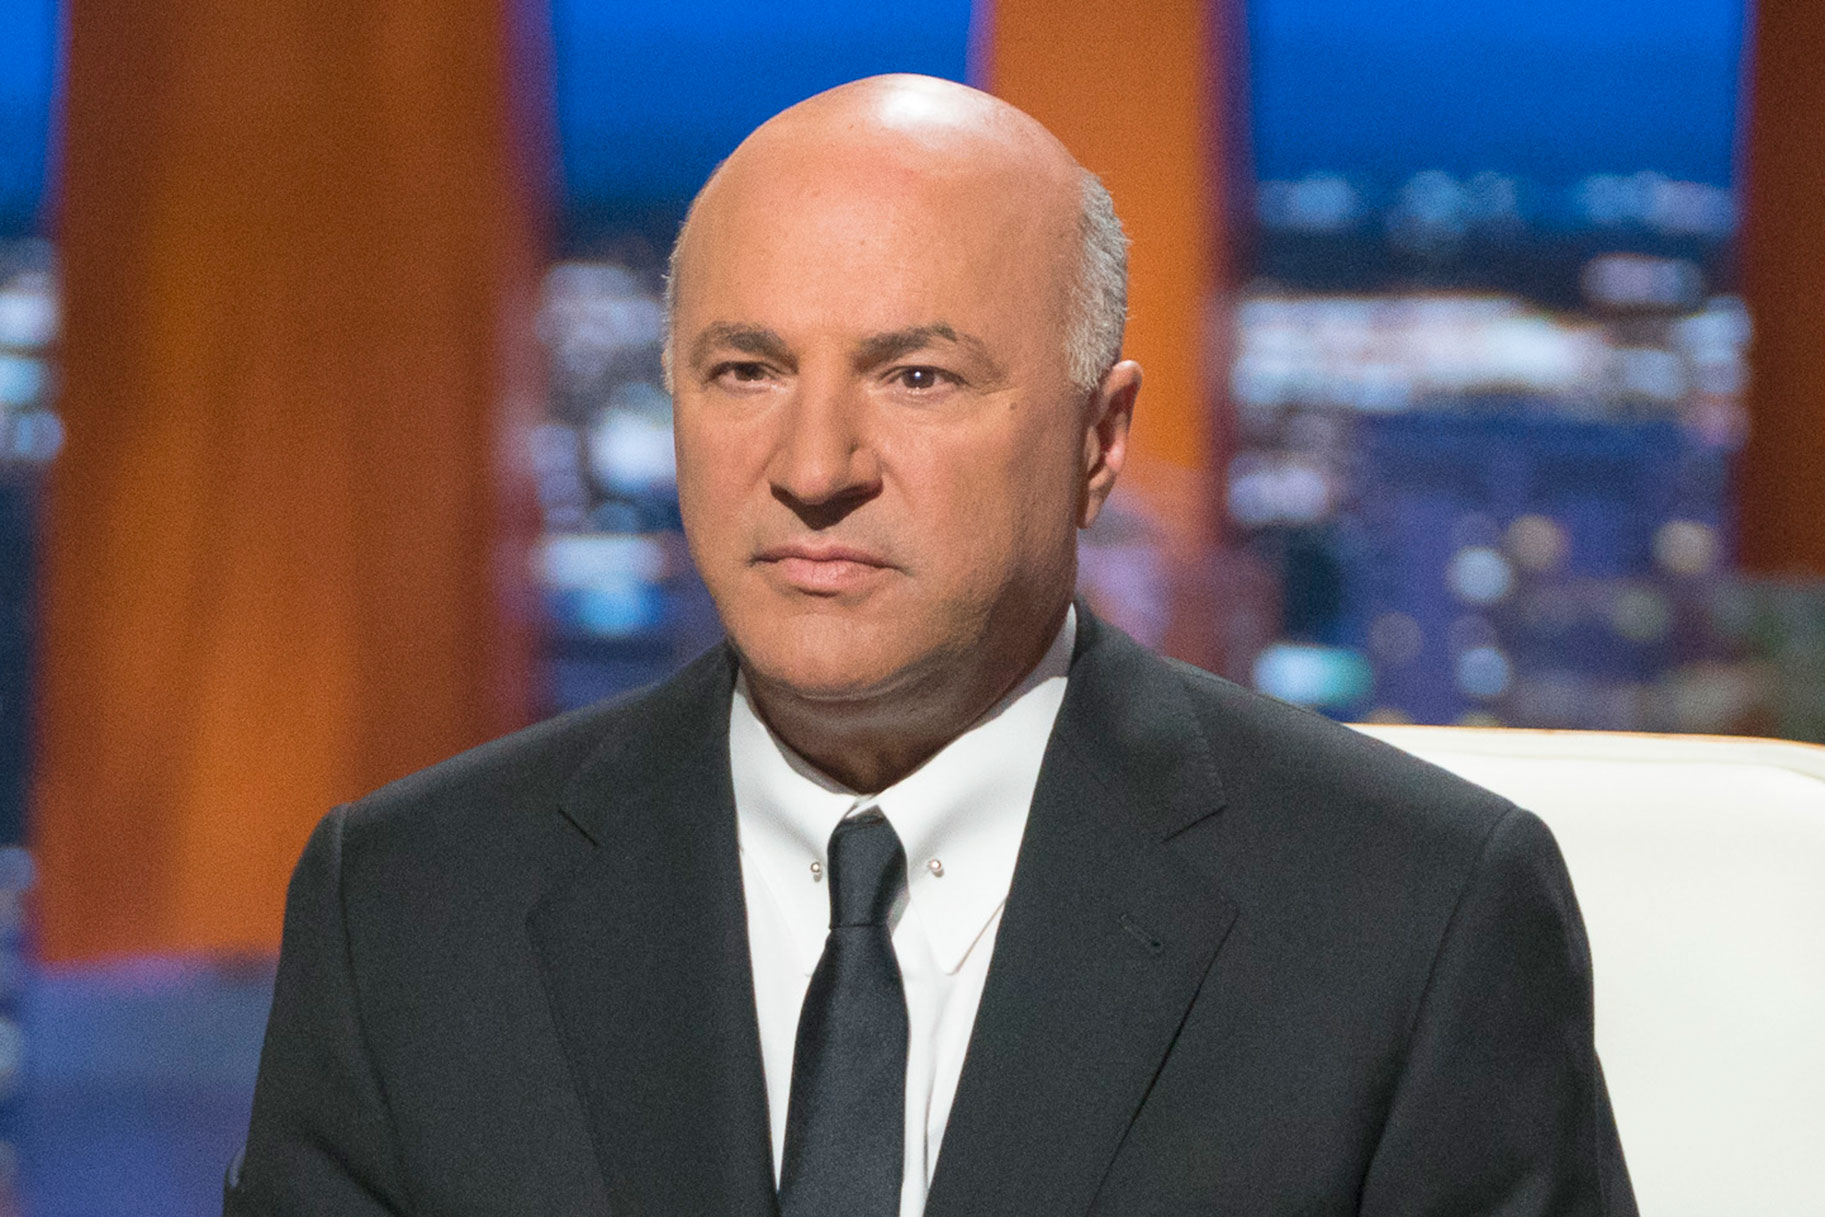 Shark Tank Judge Kevin O Leary Involved In Fatal Boat Crash On Lake Joseph In Ontario Crime News